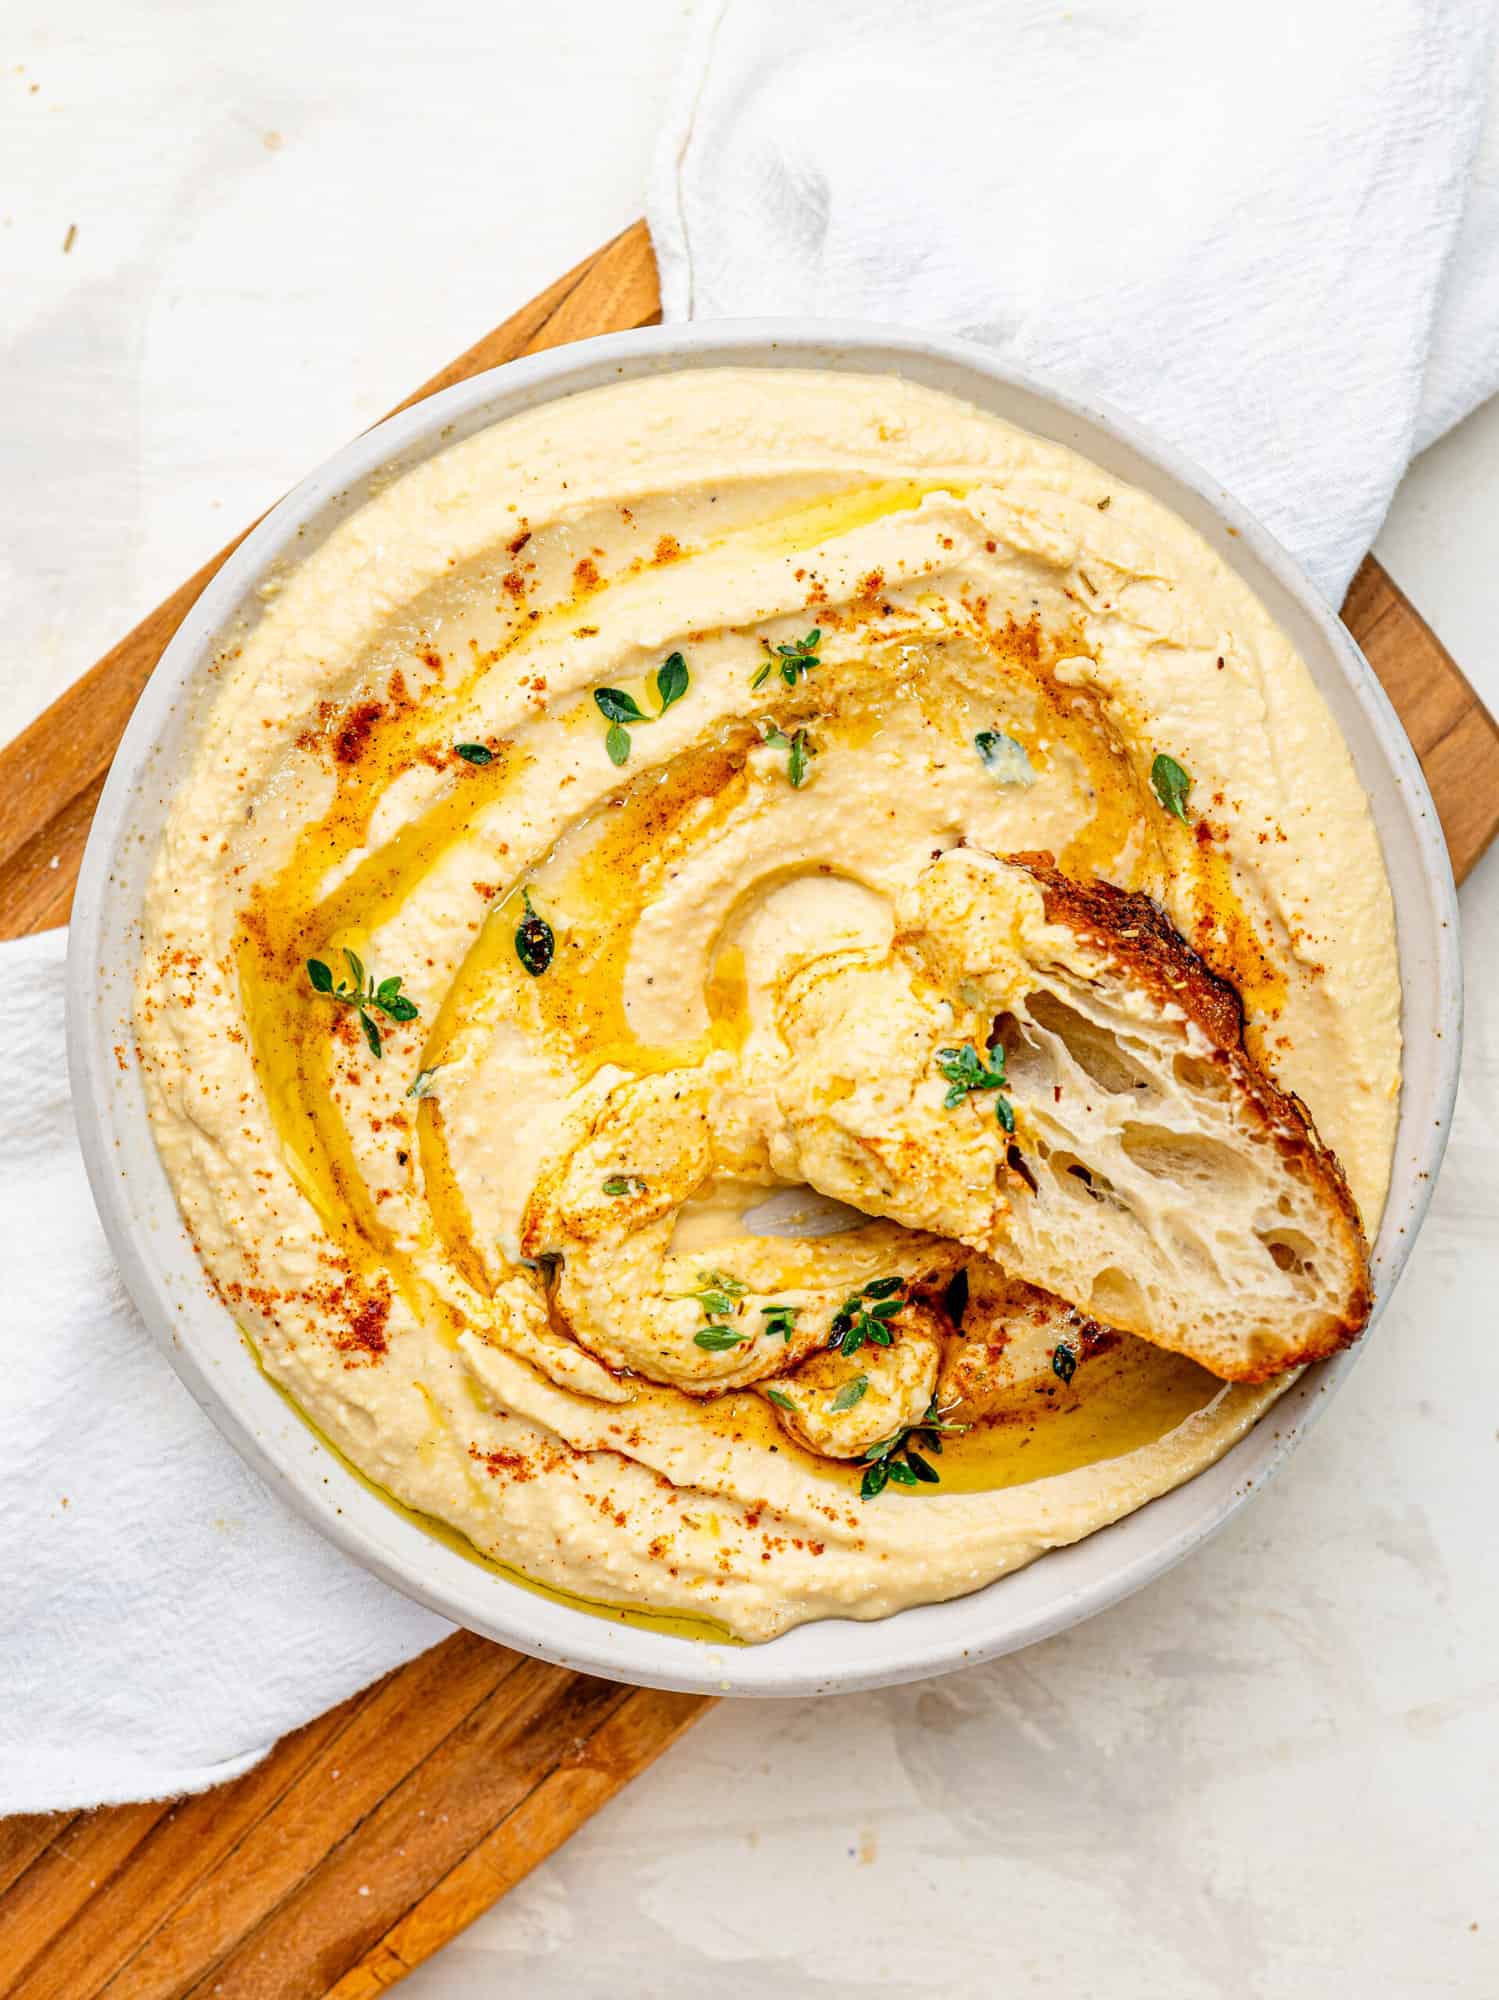 Creamy Cottage Cheese Hummus with a drizzle of olive oil spread out on a plate. There is a piece of foccaccia dipped into the hummus.